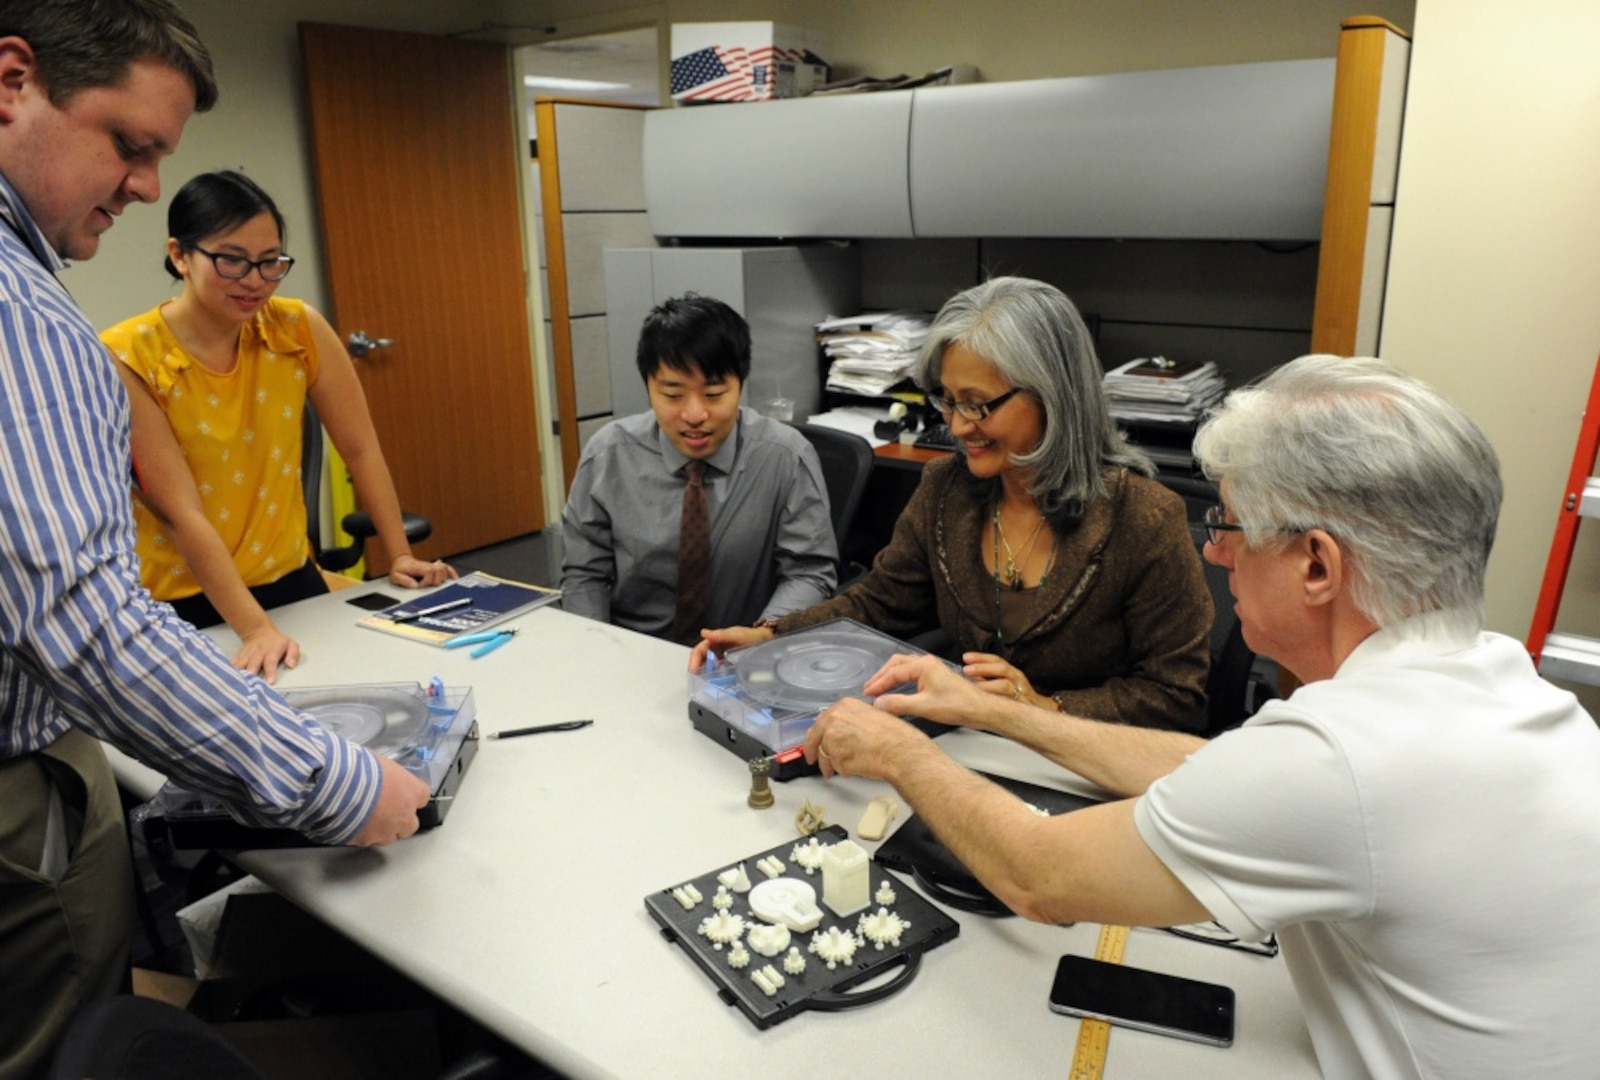 Samuel Pratt (left), an engineer with the Additive Manufacturing Project Office at Naval Surface Warfare Center, Carderock Division, teaches Office of Naval Research program managers (from left after Pratt) Dr. Jennifer Wolk, Stephen Glotzhober, Dr. Airan Perez and Dr. David Drumheller how to use a recently installed 3-D printer Oct. 19, 2017, in Arlington, Virginia.